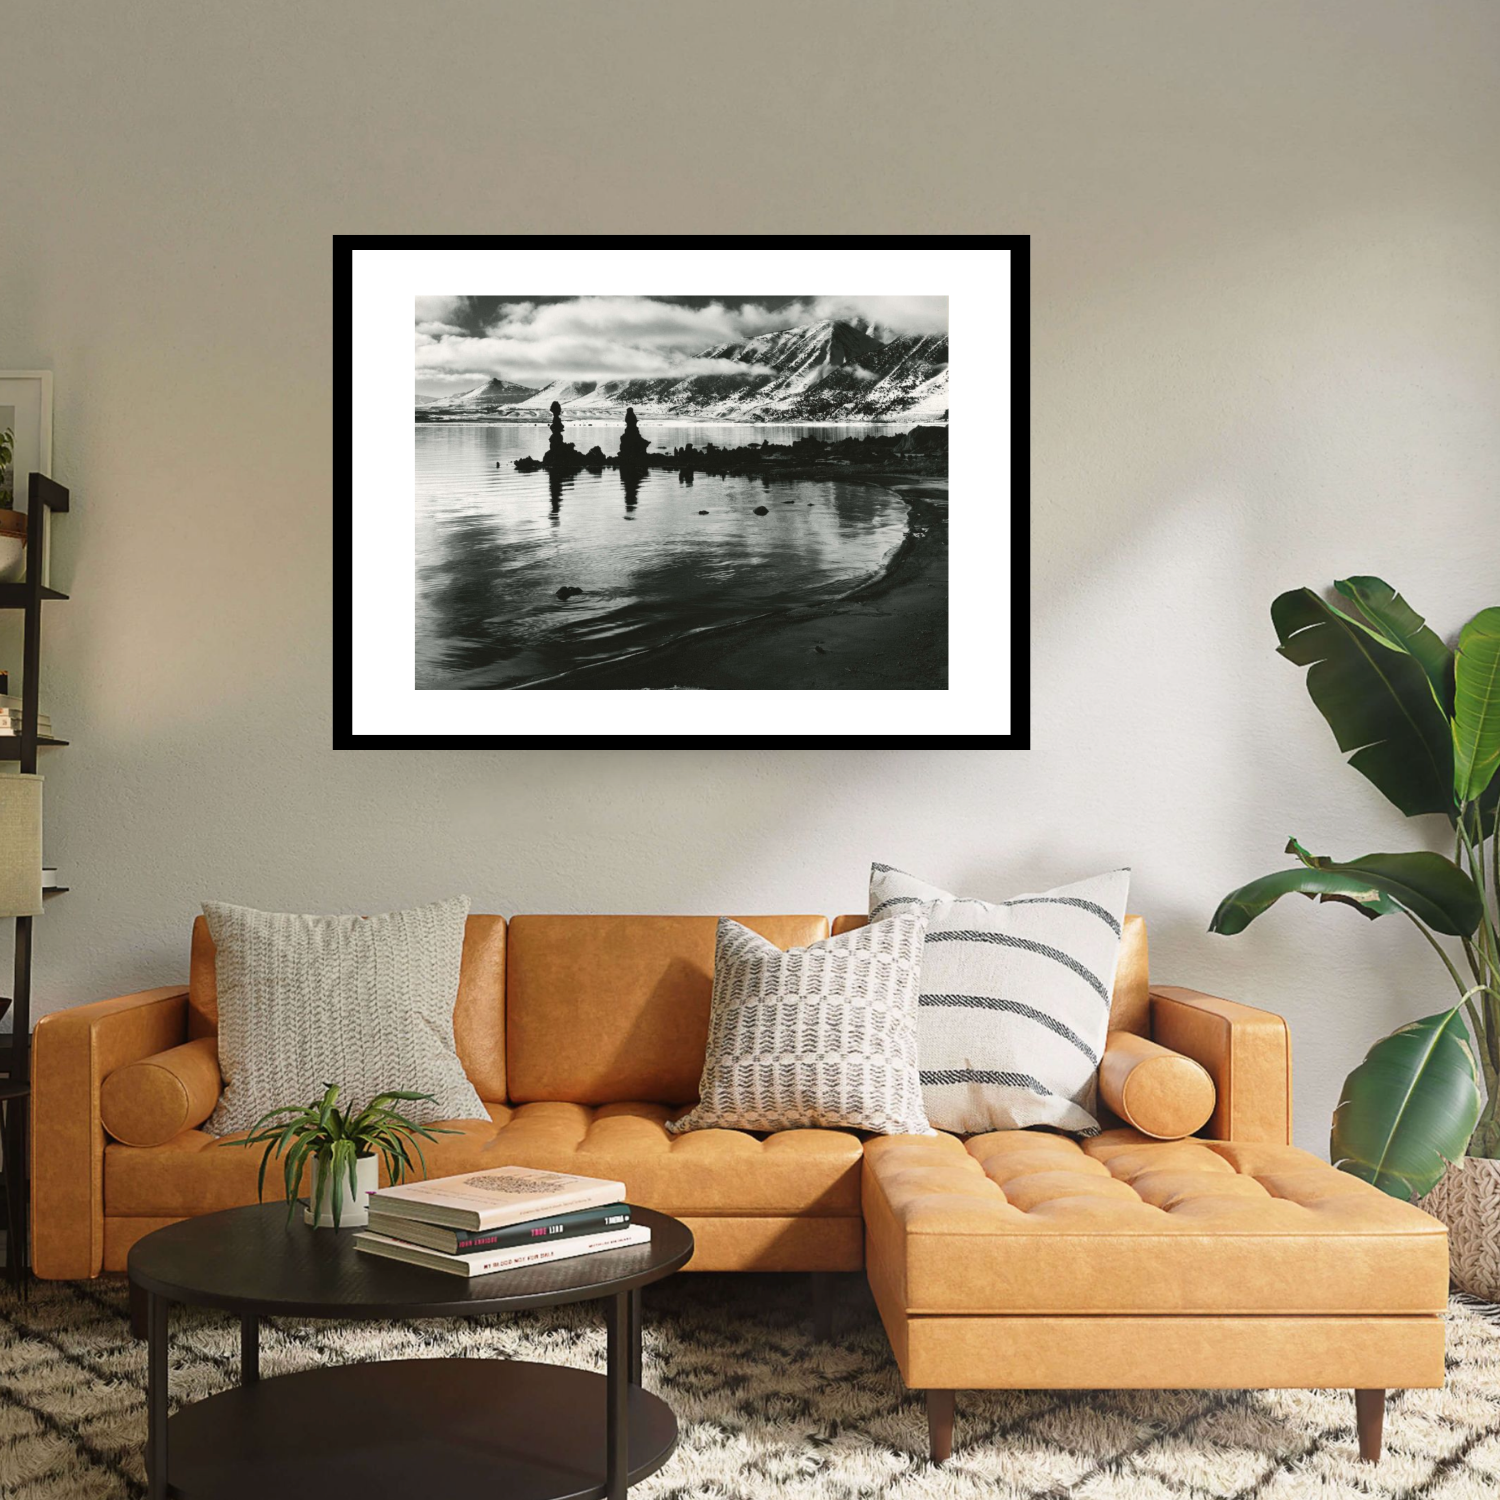 Immerse yourself in the breathtaking beauty of 'Mono Lake California' by Brett Weston. This Black framed black & white print captures the vast expanse of the lake's shore and majestic mountains, inviting you to experience the tranquillity of California's natural wonders.